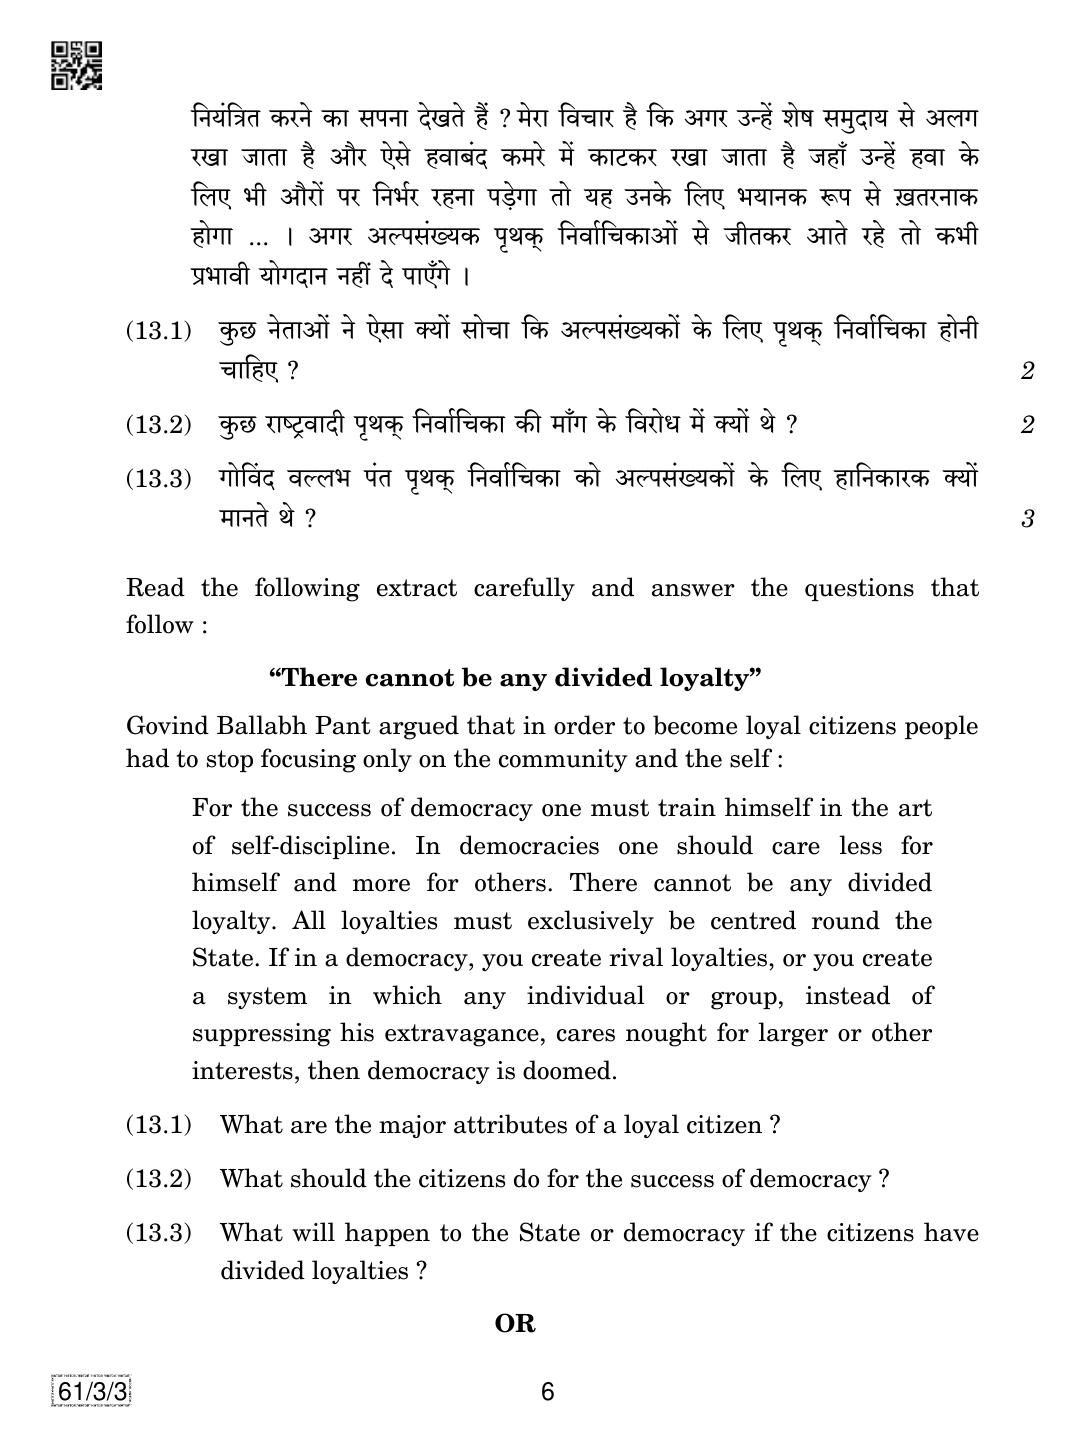 CBSE Class 12 61-3-3 History 2019 Question Paper - Page 6